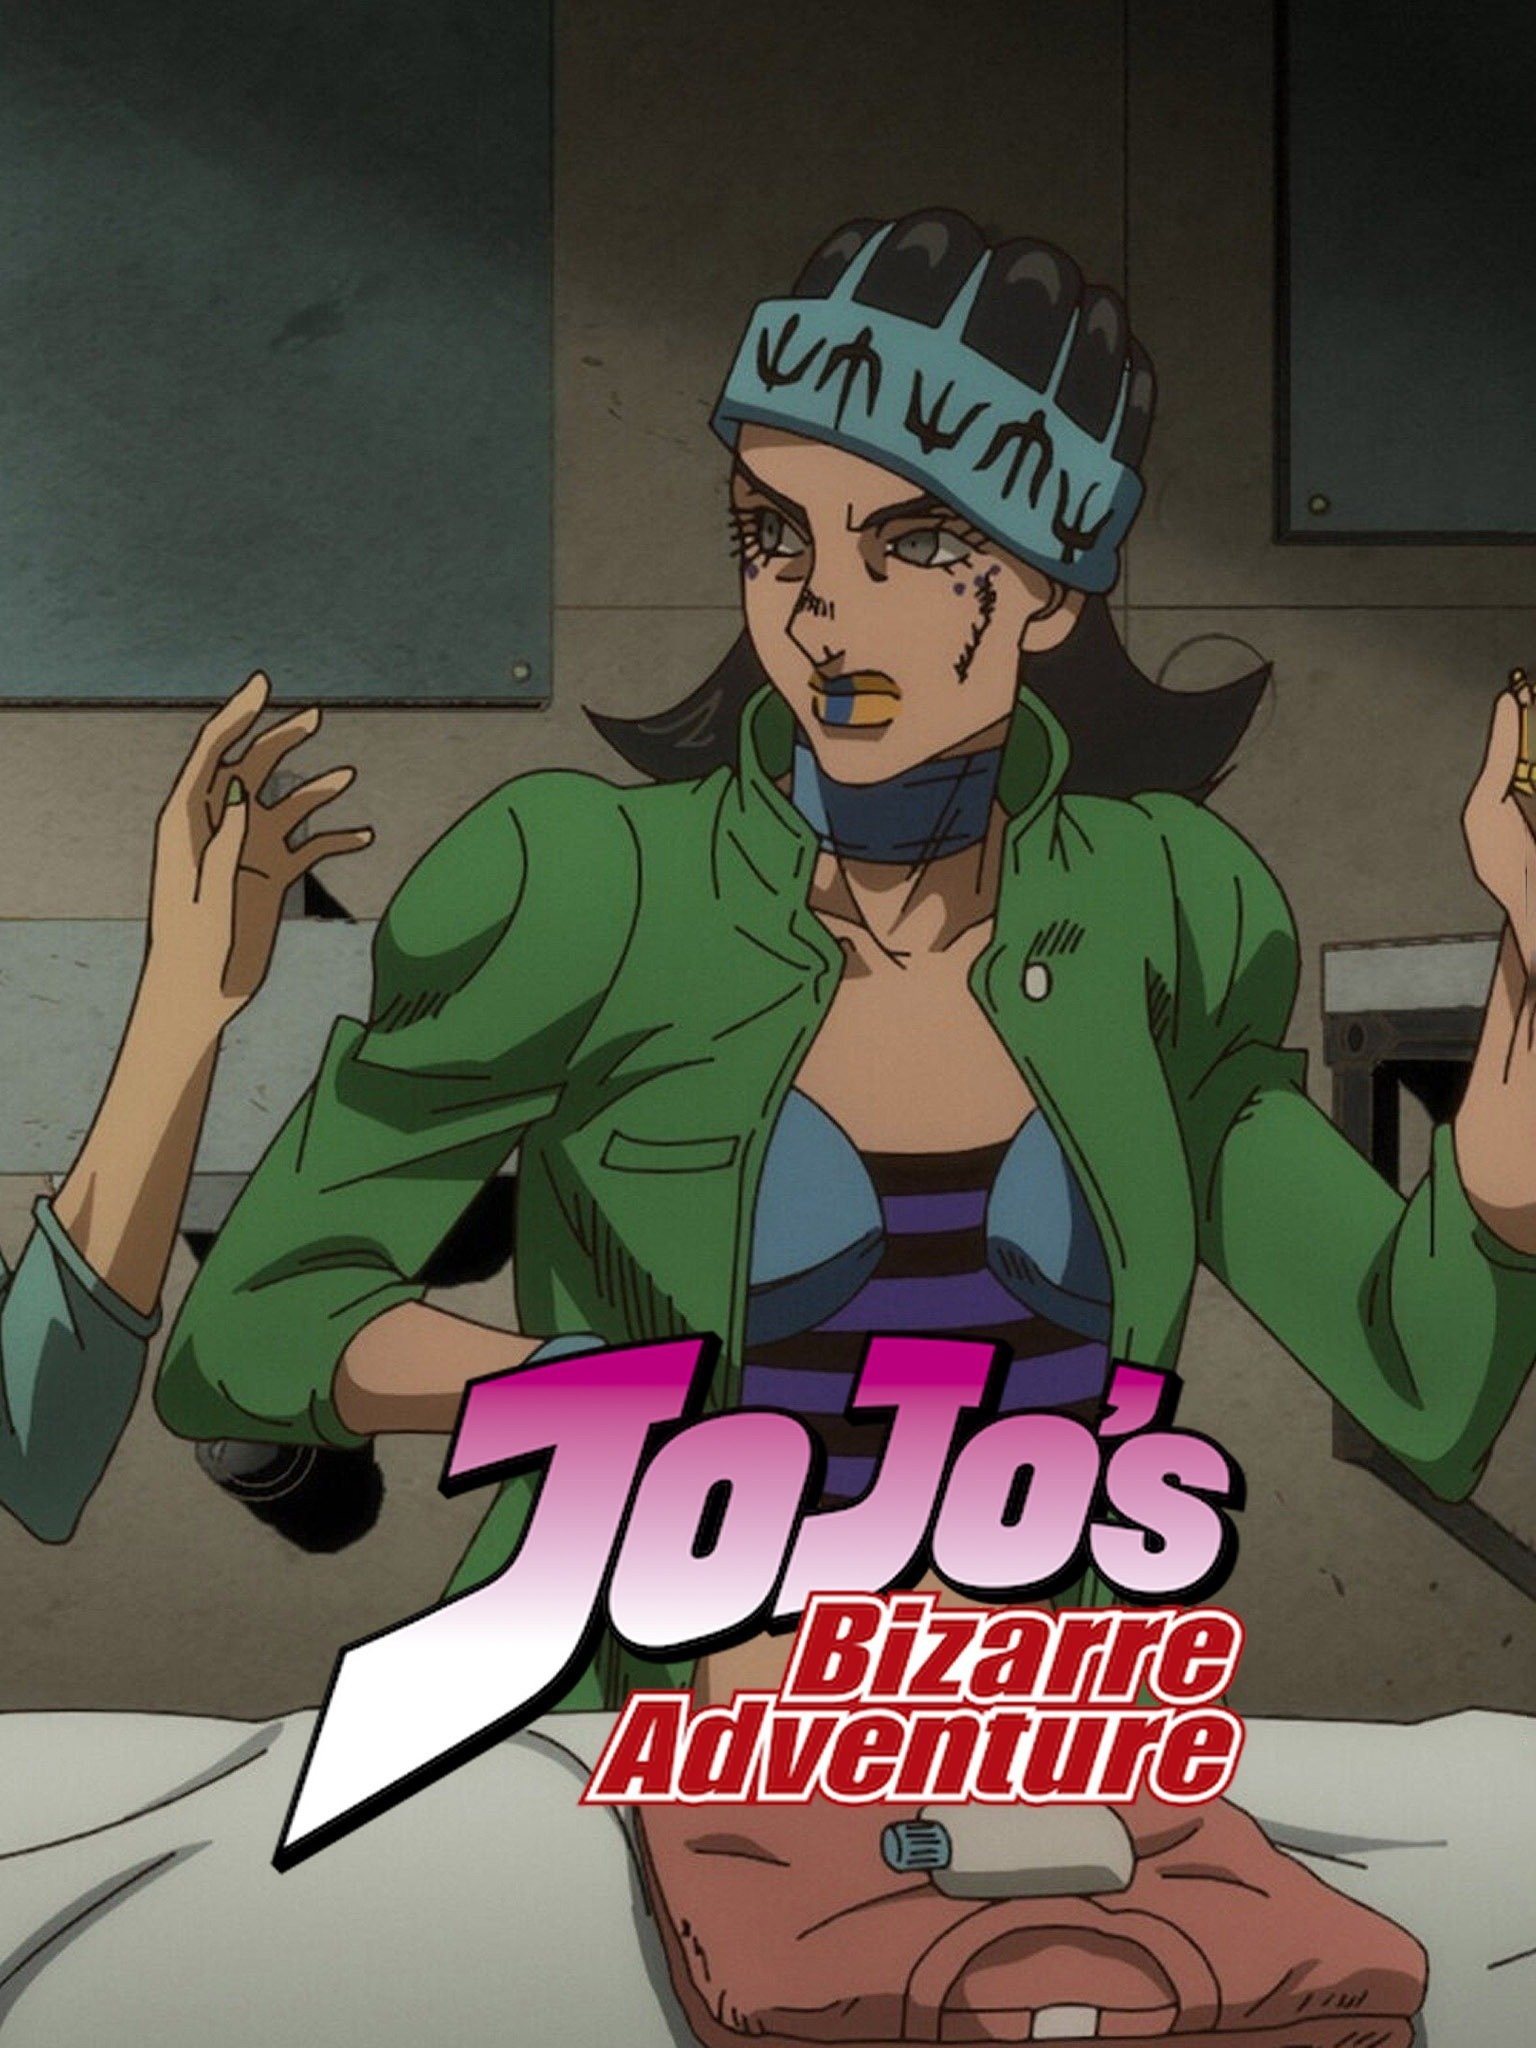 In the Netflix upload of the trailer, Jolyne's stand was called Stone Free  in the subtitles, NOT Stone Ocean like in the Warner Bros. upload. Are they  maybe going to use non-localized